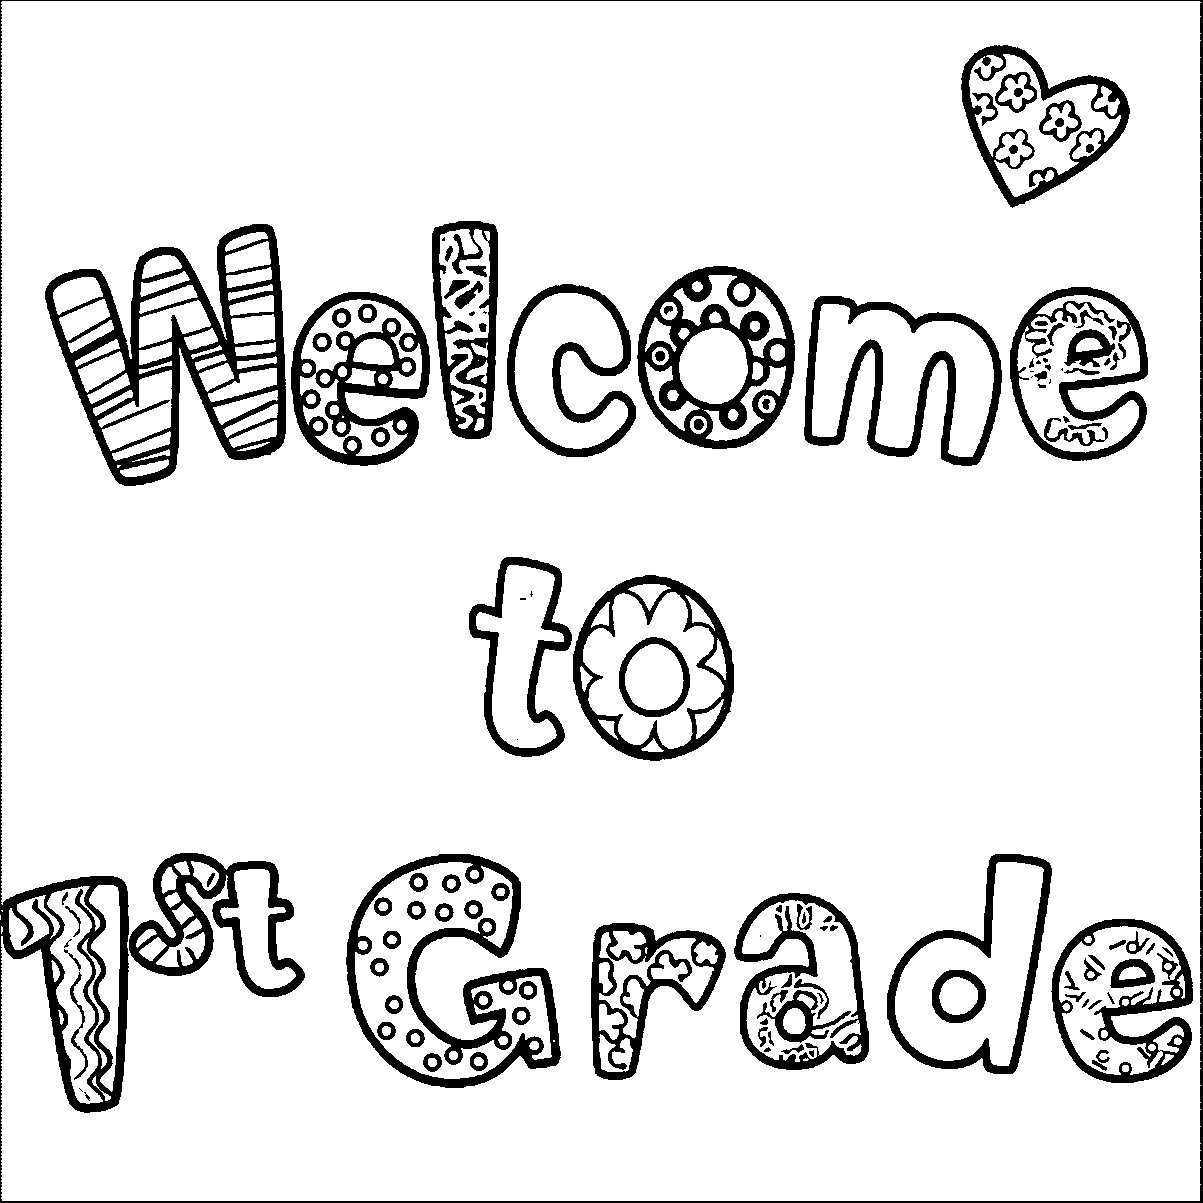 Printable Coloring Pages For Grade 1 | Coloring Pages - Free Printable